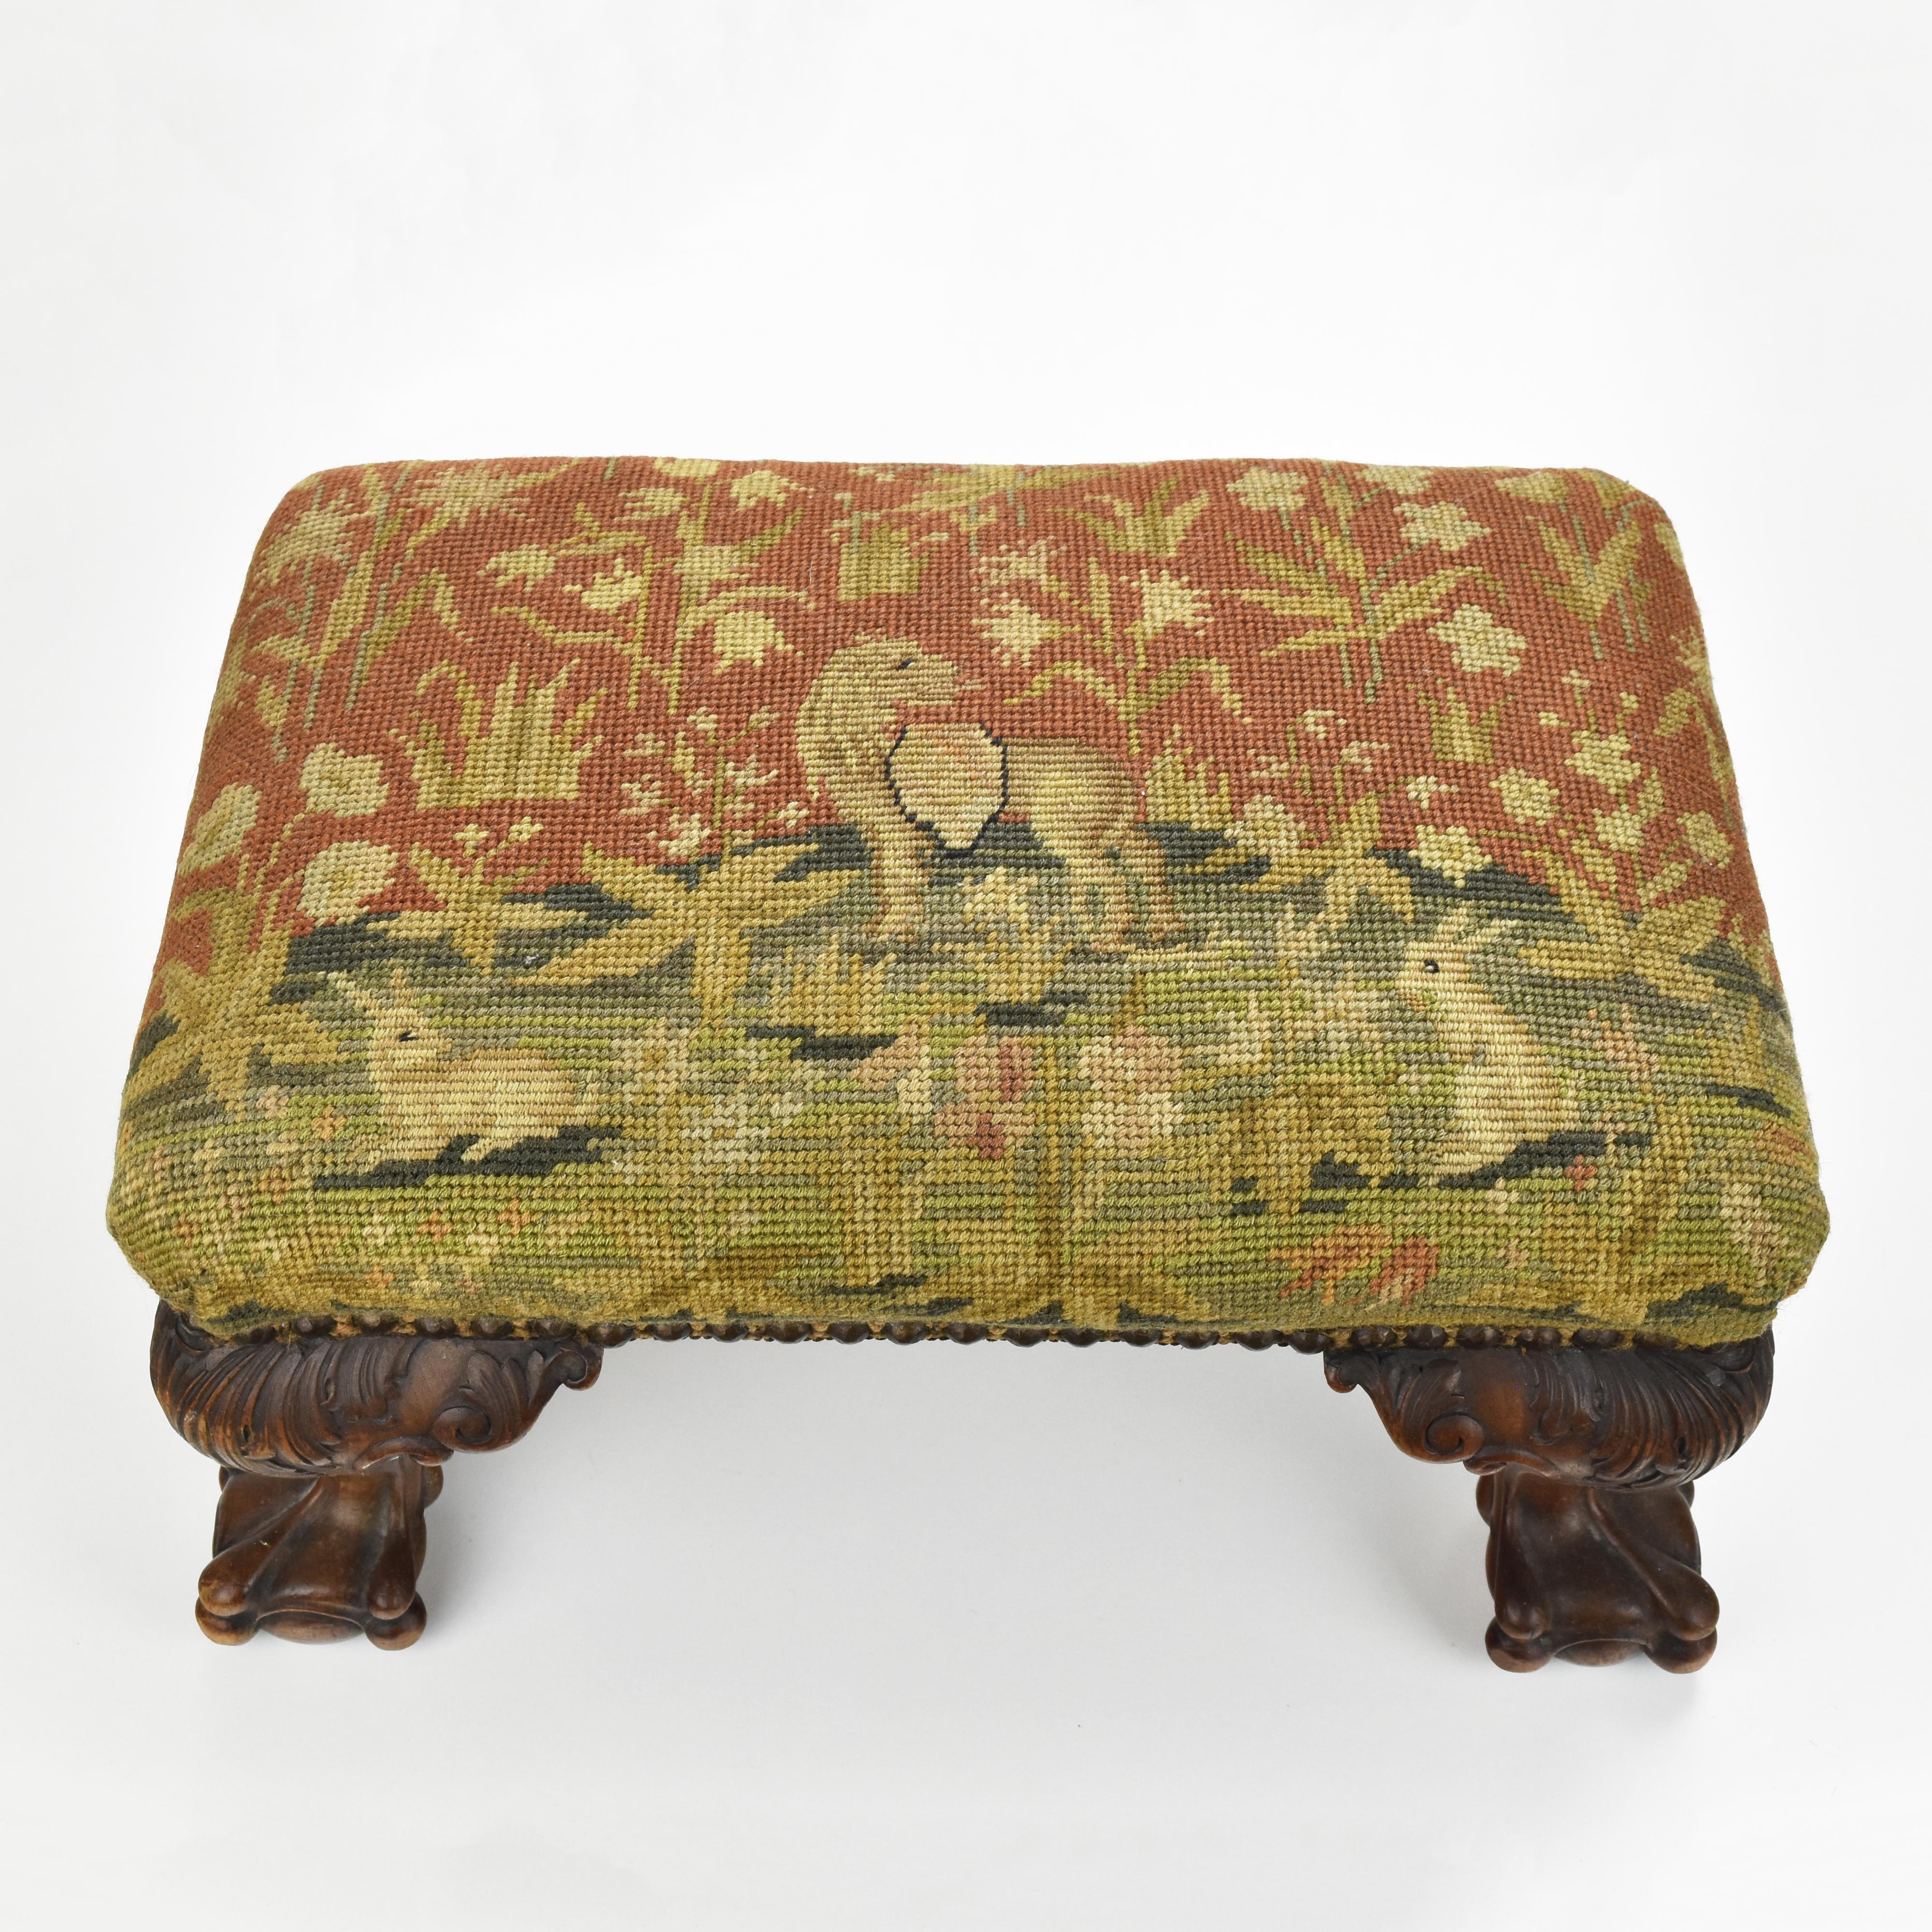 Victorian Aubusson Needlework Footstool Claw & Ball Carved Wood Foot Bench In Excellent Condition For Sale In Bad Säckingen, DE